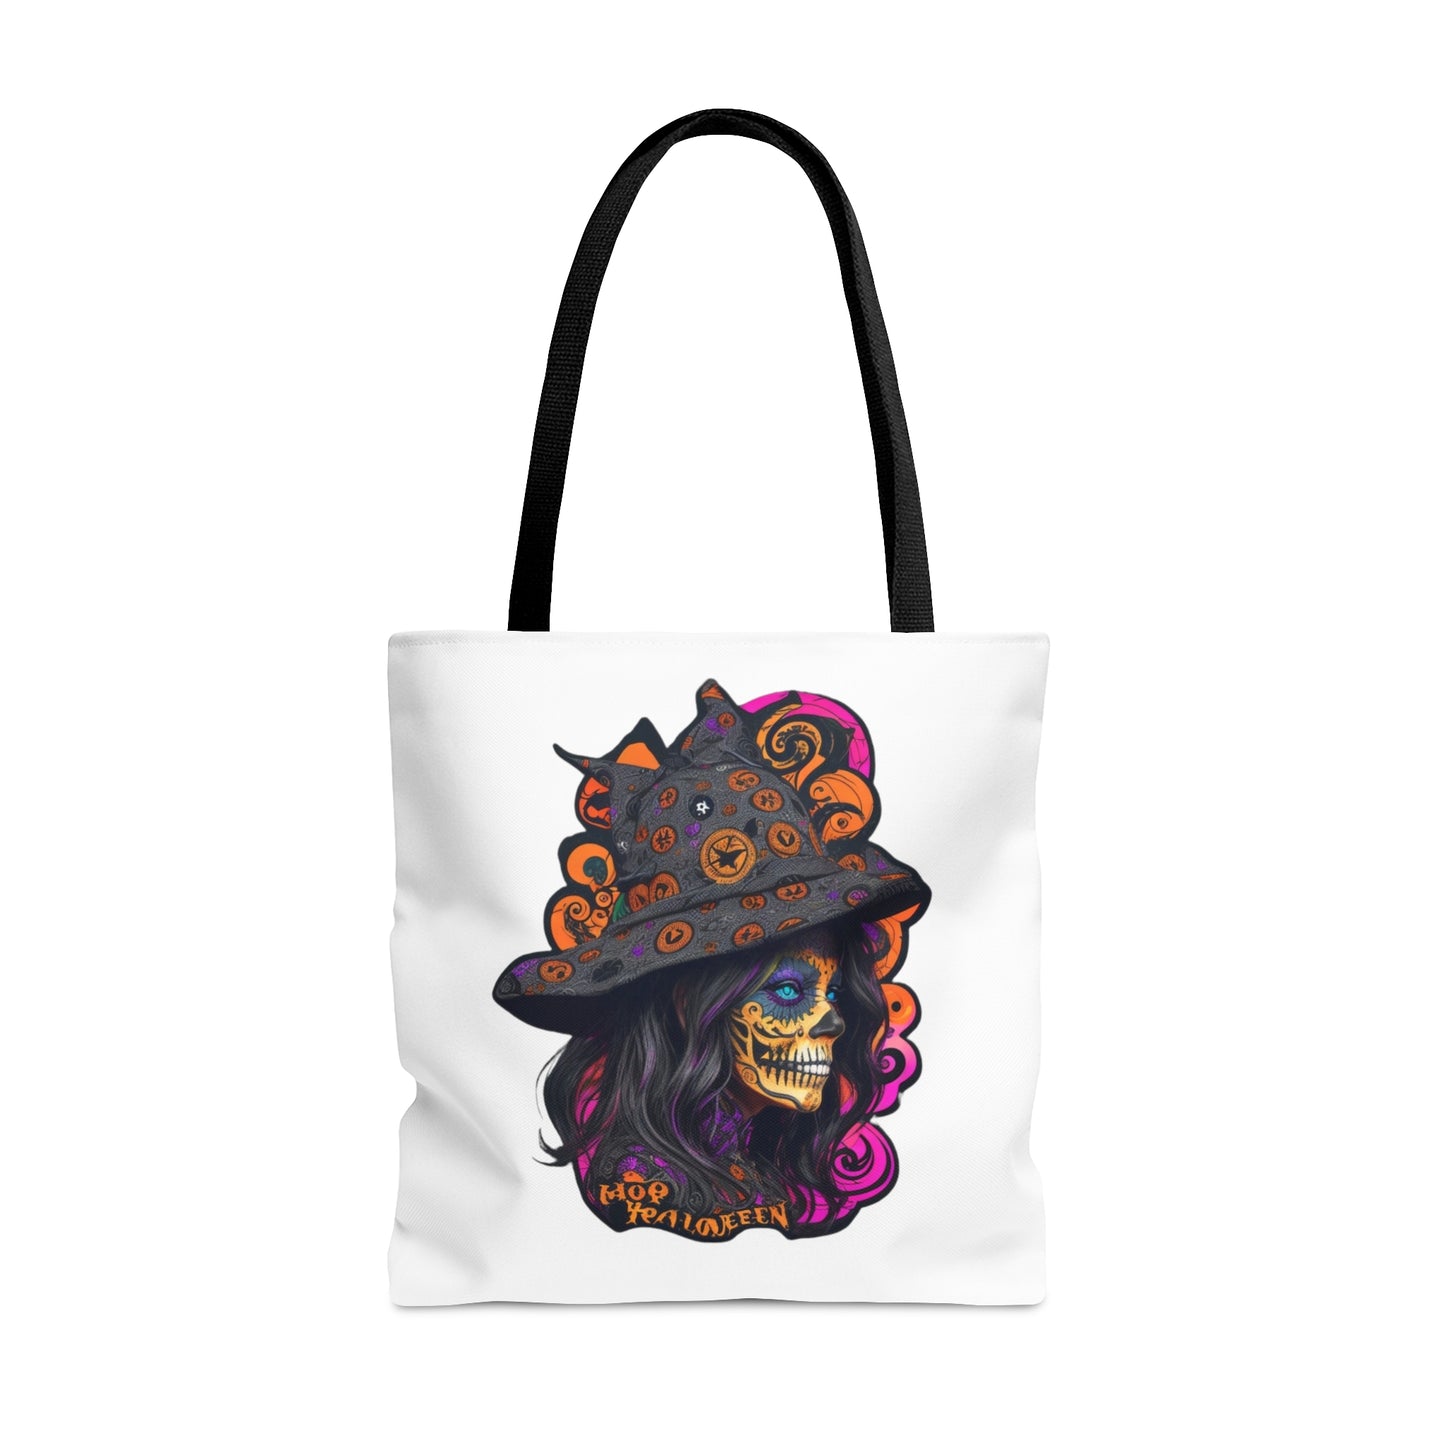 Tote Bag - Halloween - Mexican woman skull - 01